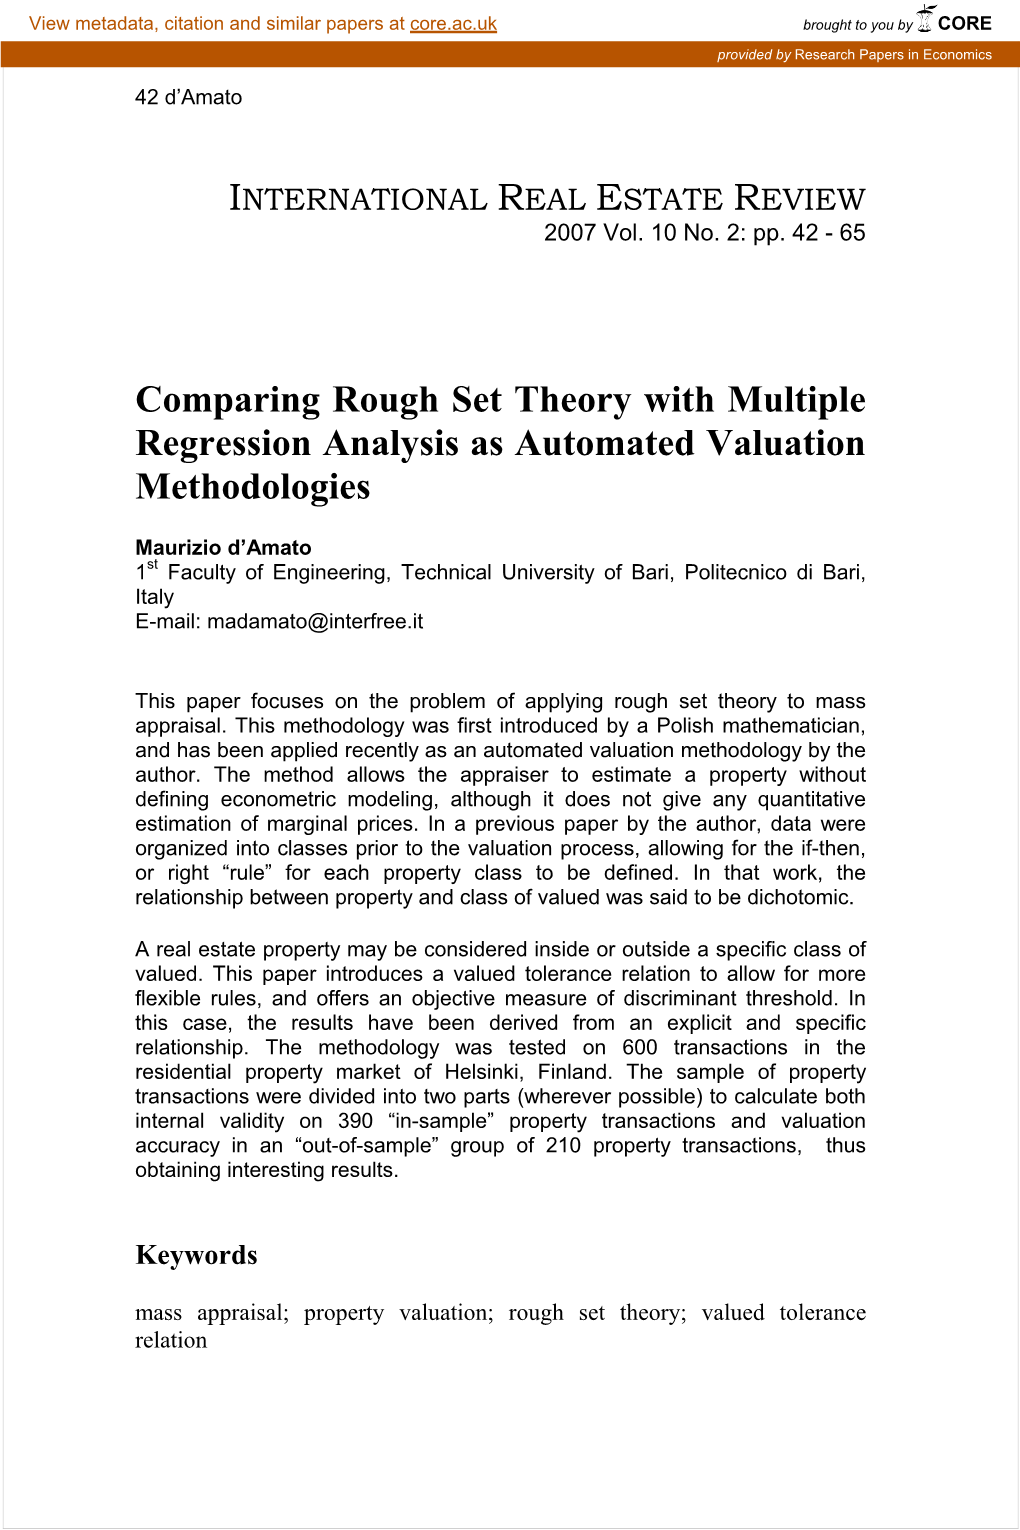 Comparing Rough Set Theory with Multiple Regression Analysis As Automated Valuation Methodologies